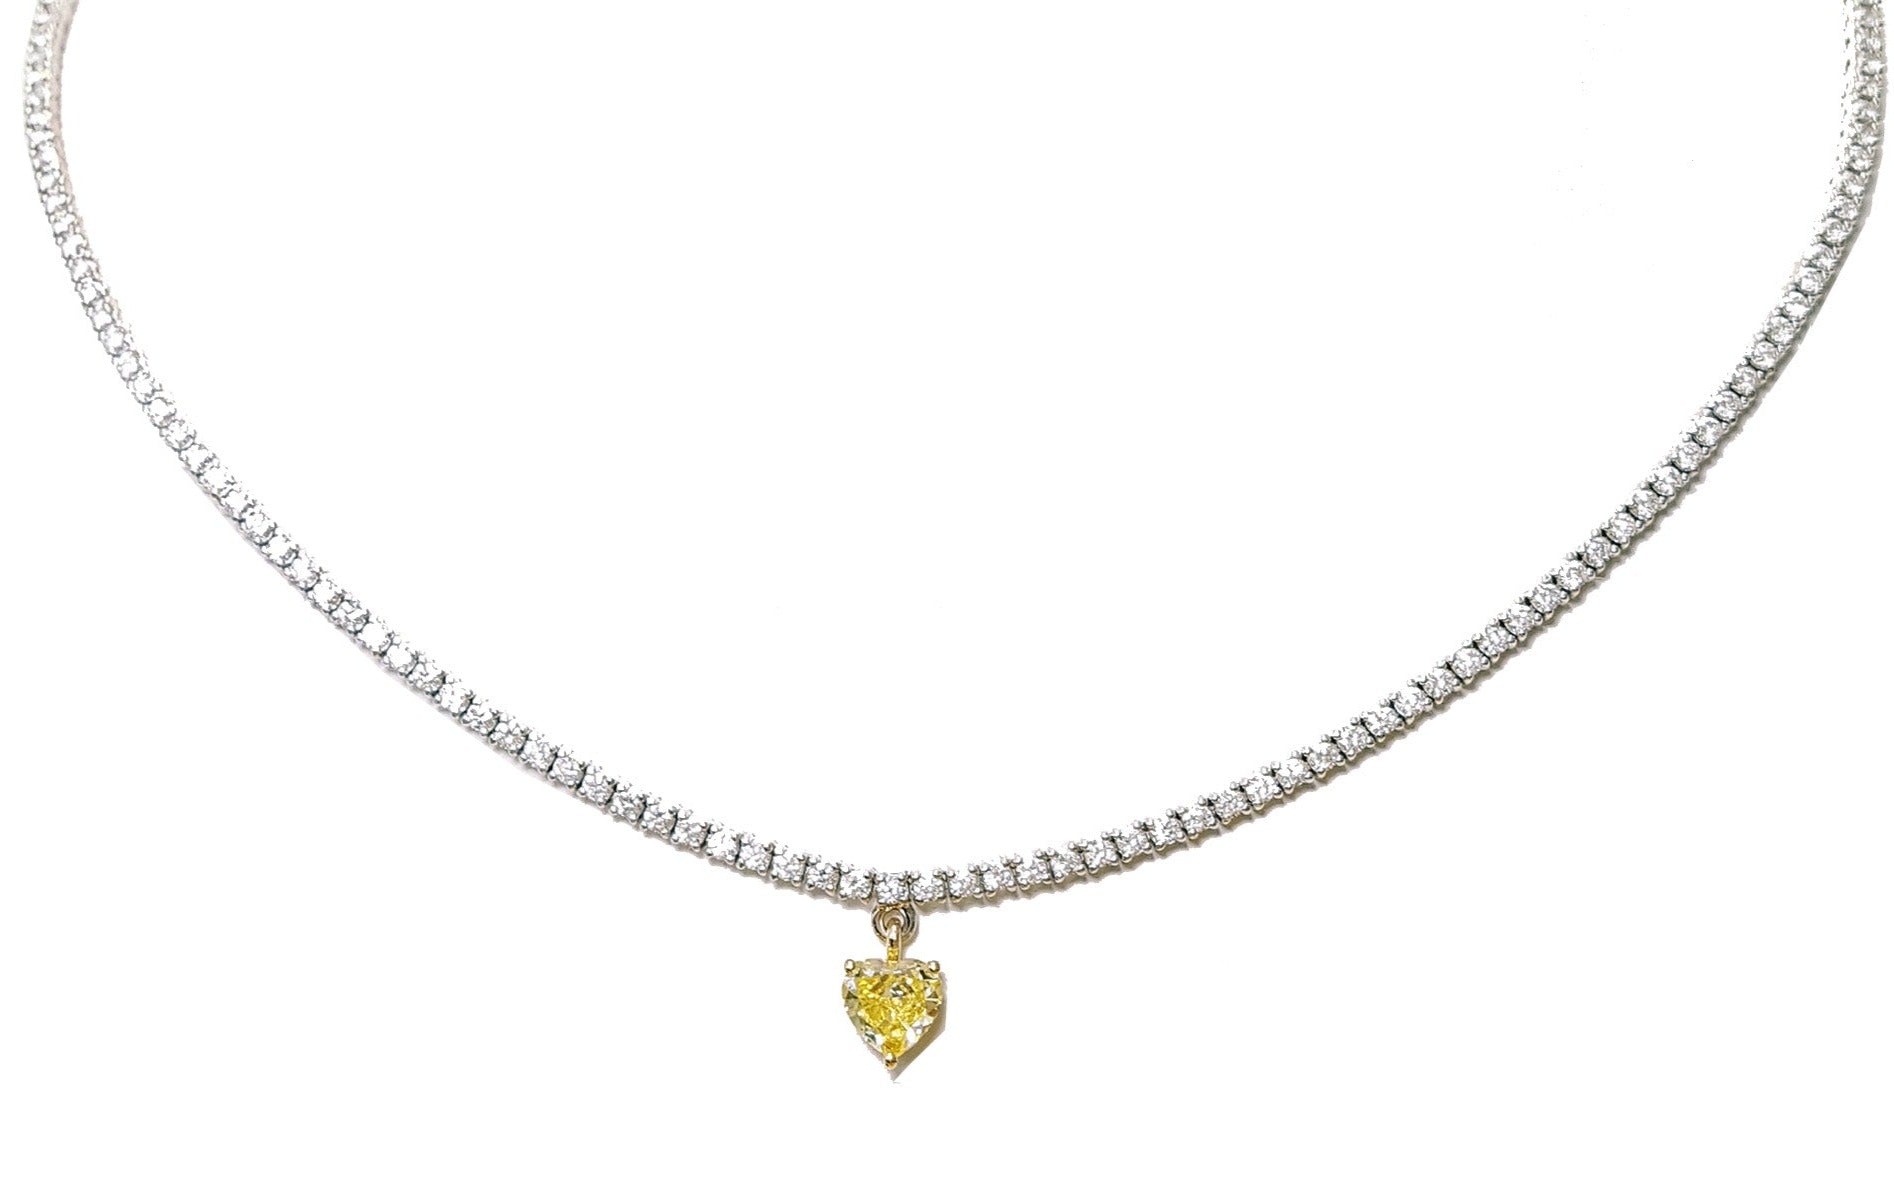 5.26carat Exquisite Diamond Tennis Line Necklace with Detacable GIA Certified Canary Fancy Intense Yellow Heart Diamond Drop